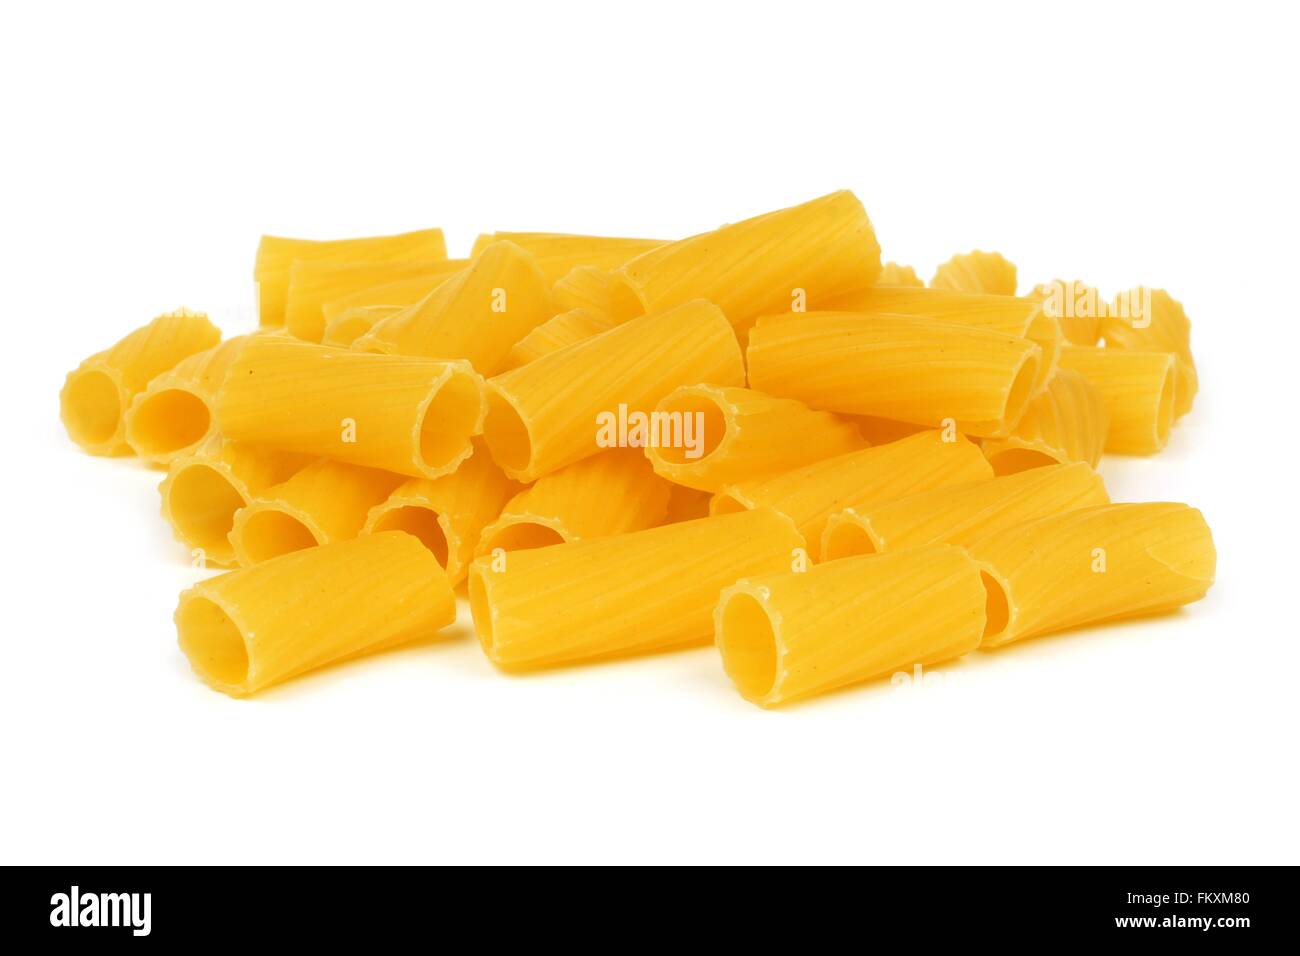 Pile of uncooked dry rigatoni pasta isolated on a white background Stock Photo